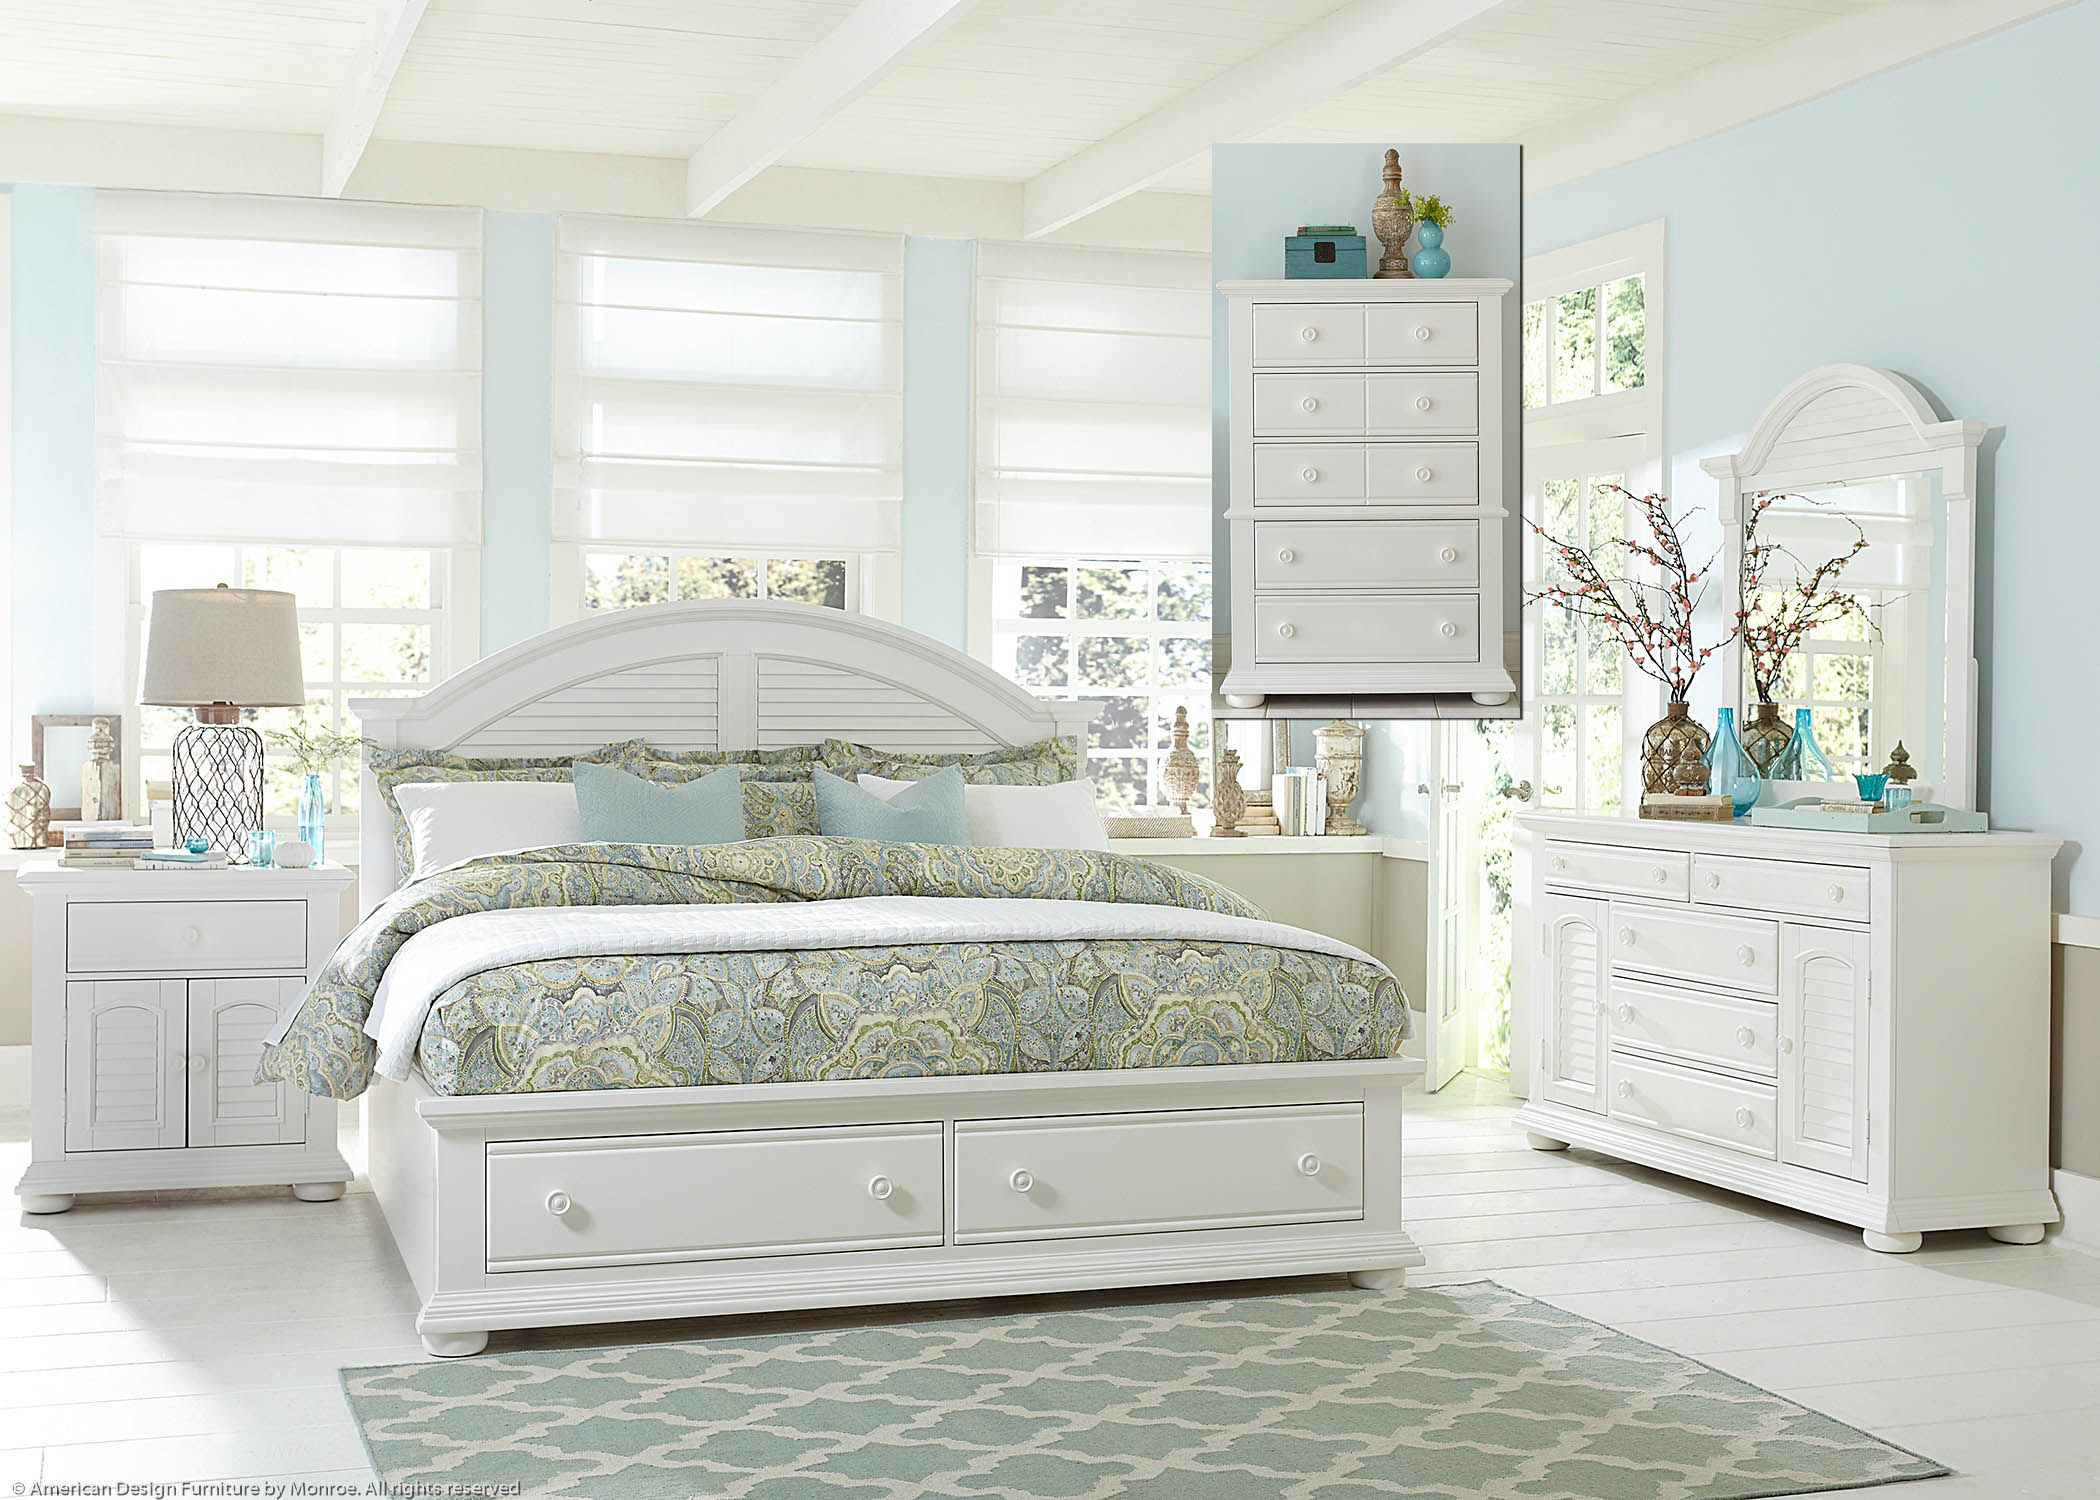 Emerald Isle Entire Collection Pic 2 (Heading Storage Bedroom